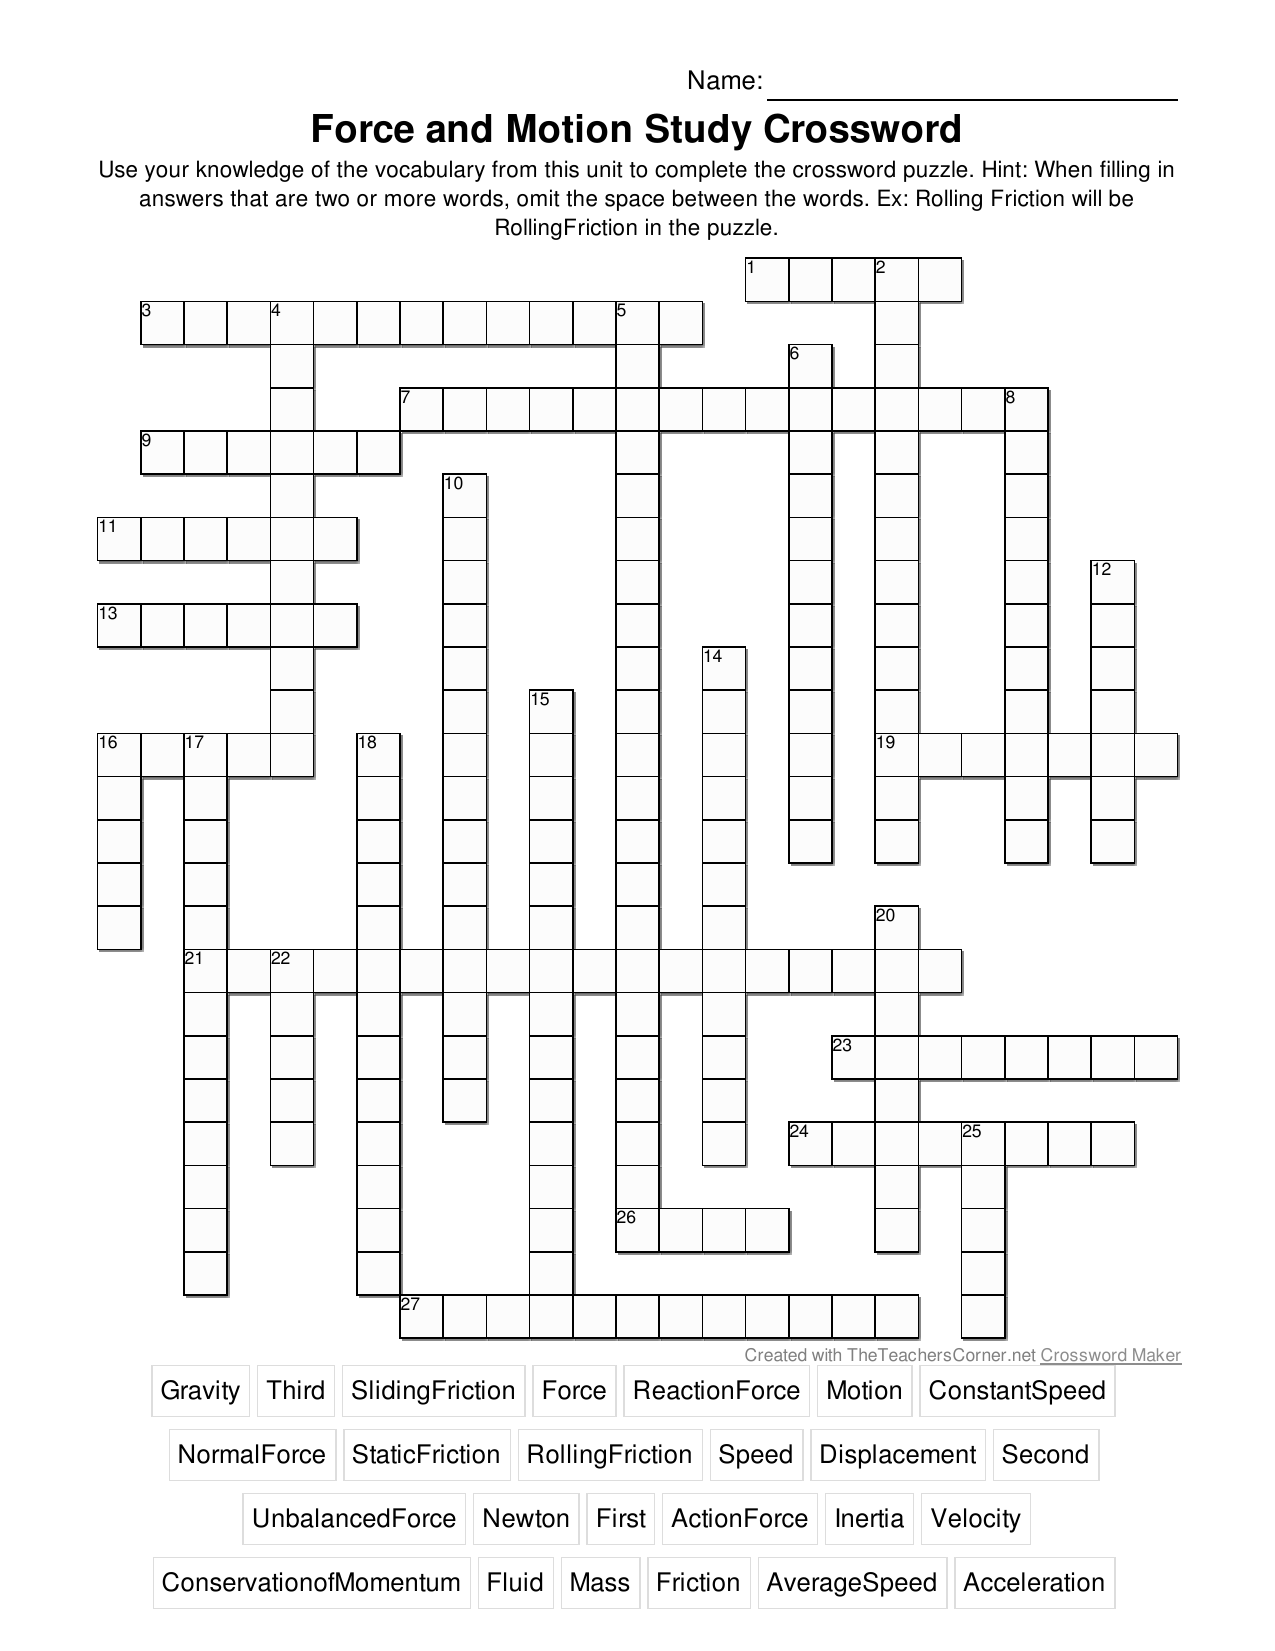 Quickly Form A Friendship With Crossword